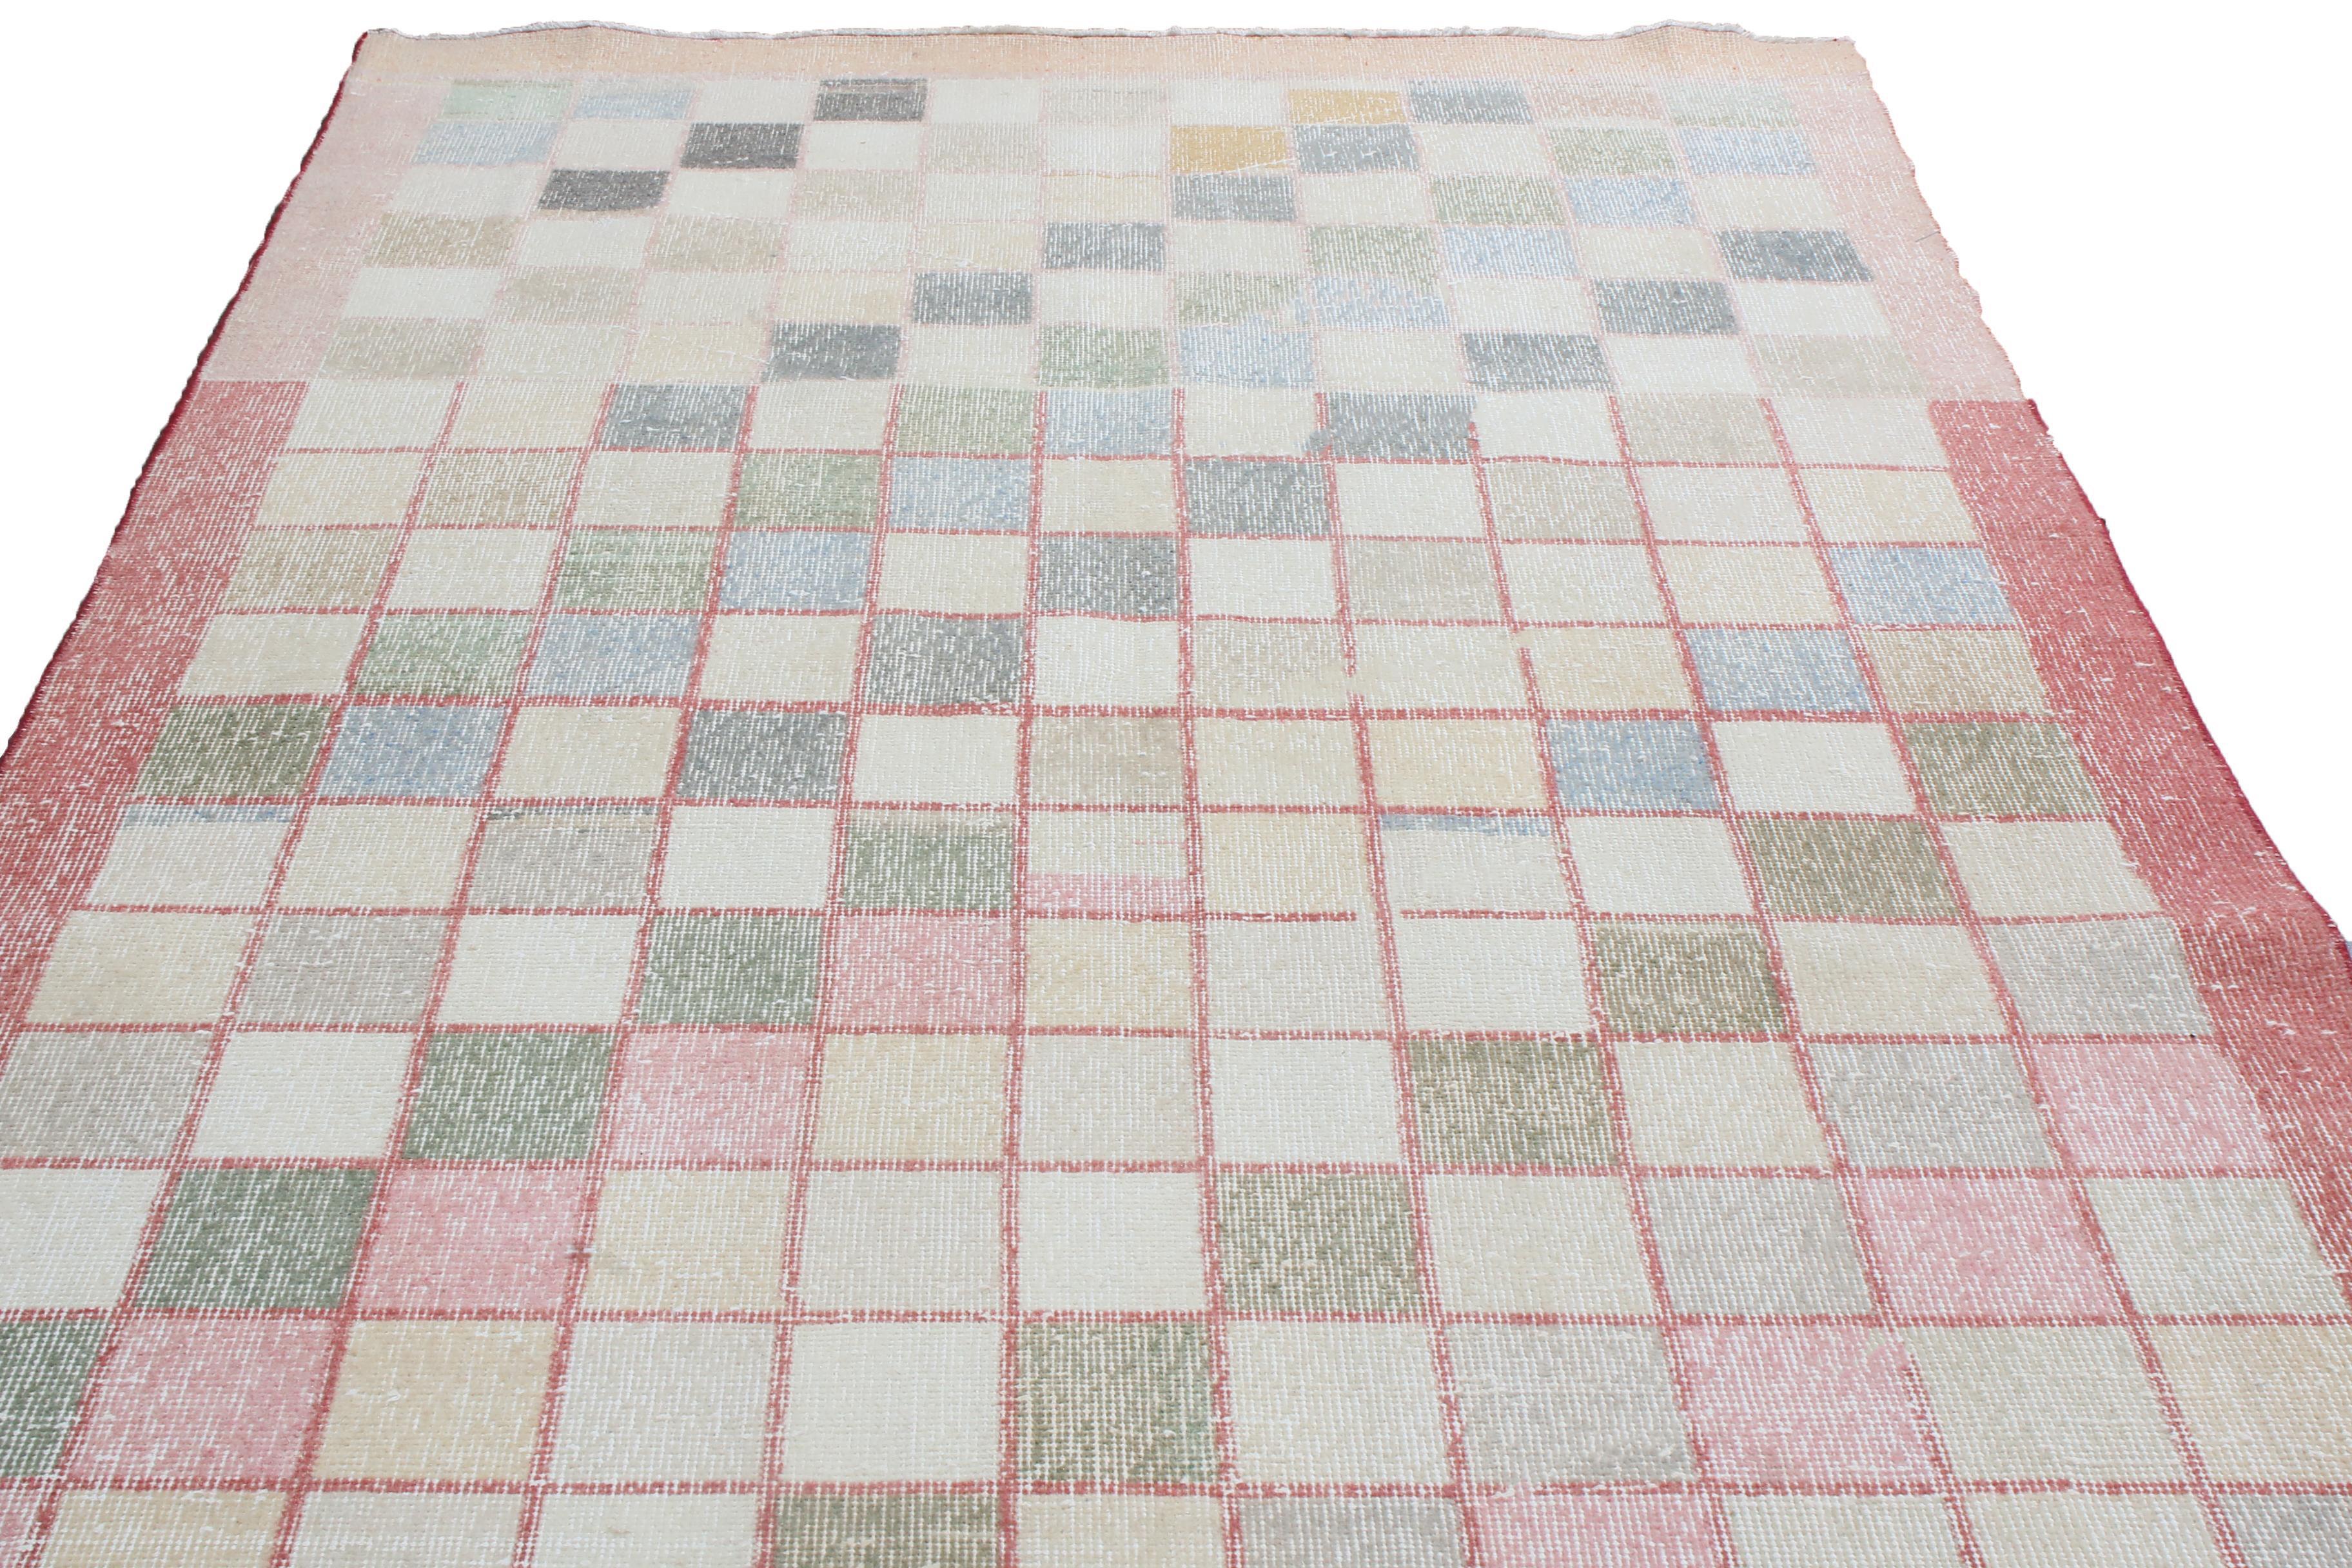 Hand knotted in high-quality wool originating from Turkey in 1951, this vintage geometric rug enjoys an uncommon pairing of pastel pink and green colorways completing a bold but forgiving display in any area. Featuring low pile height, the unique